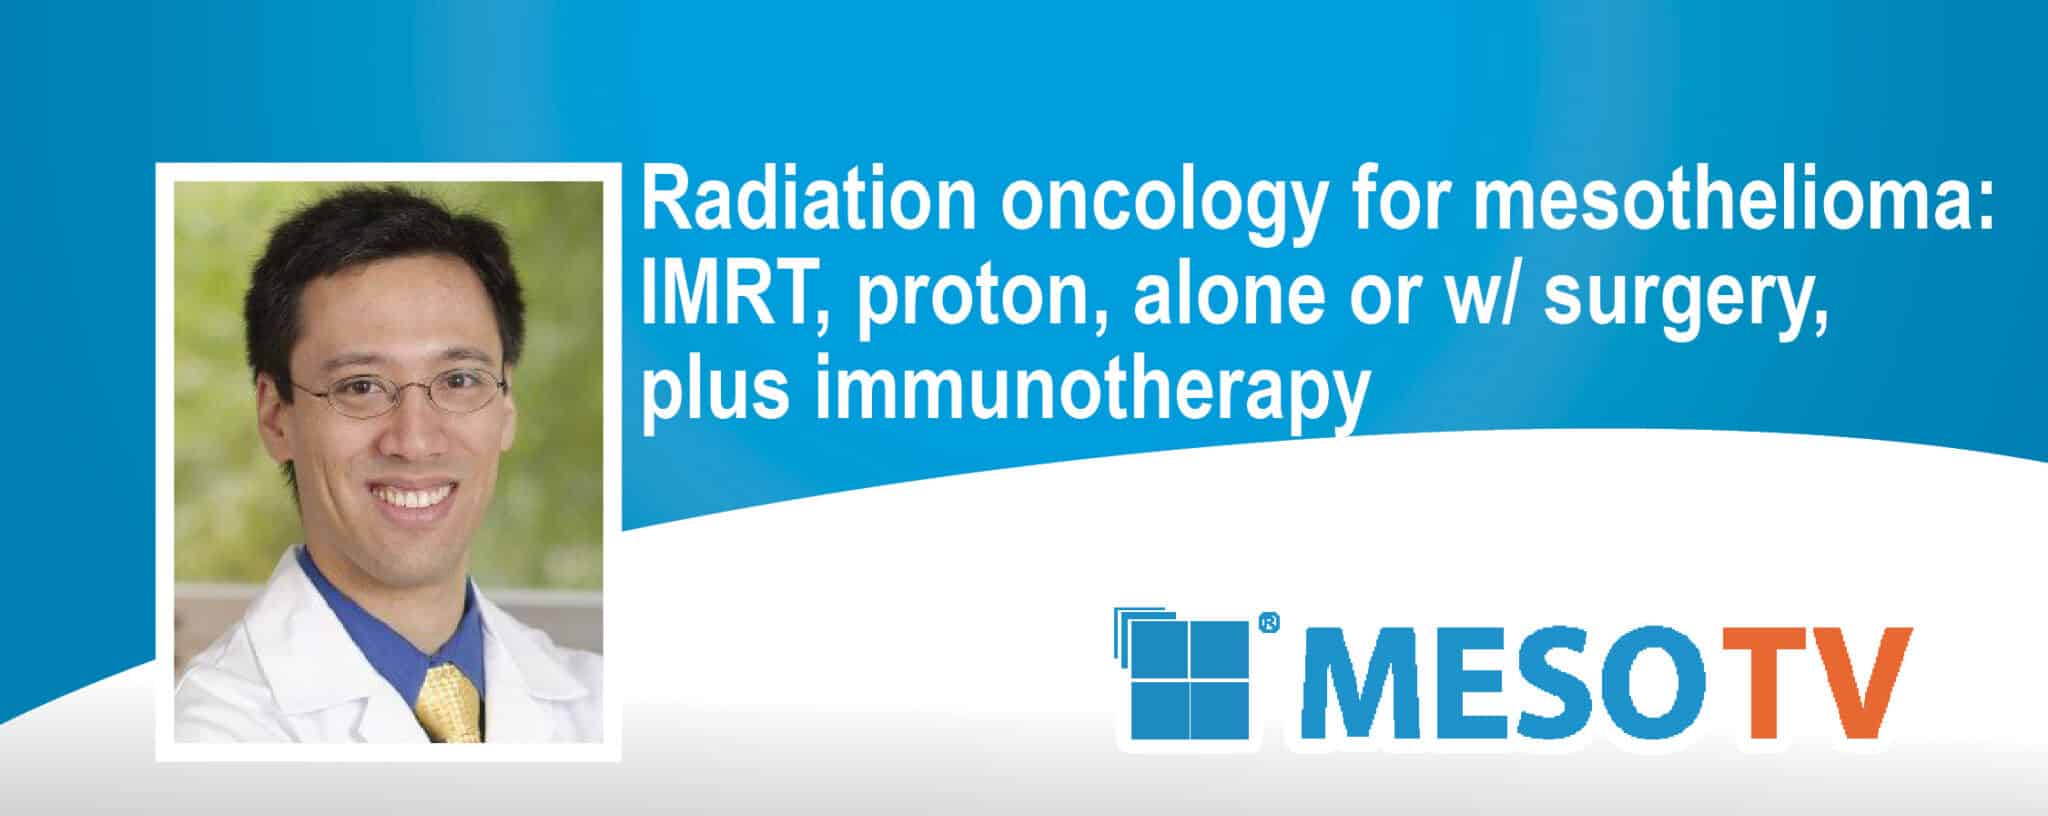 Radiation oncology for mesothelioma: IMRT, proton, alone or w/ surgery, plus immunotherapy